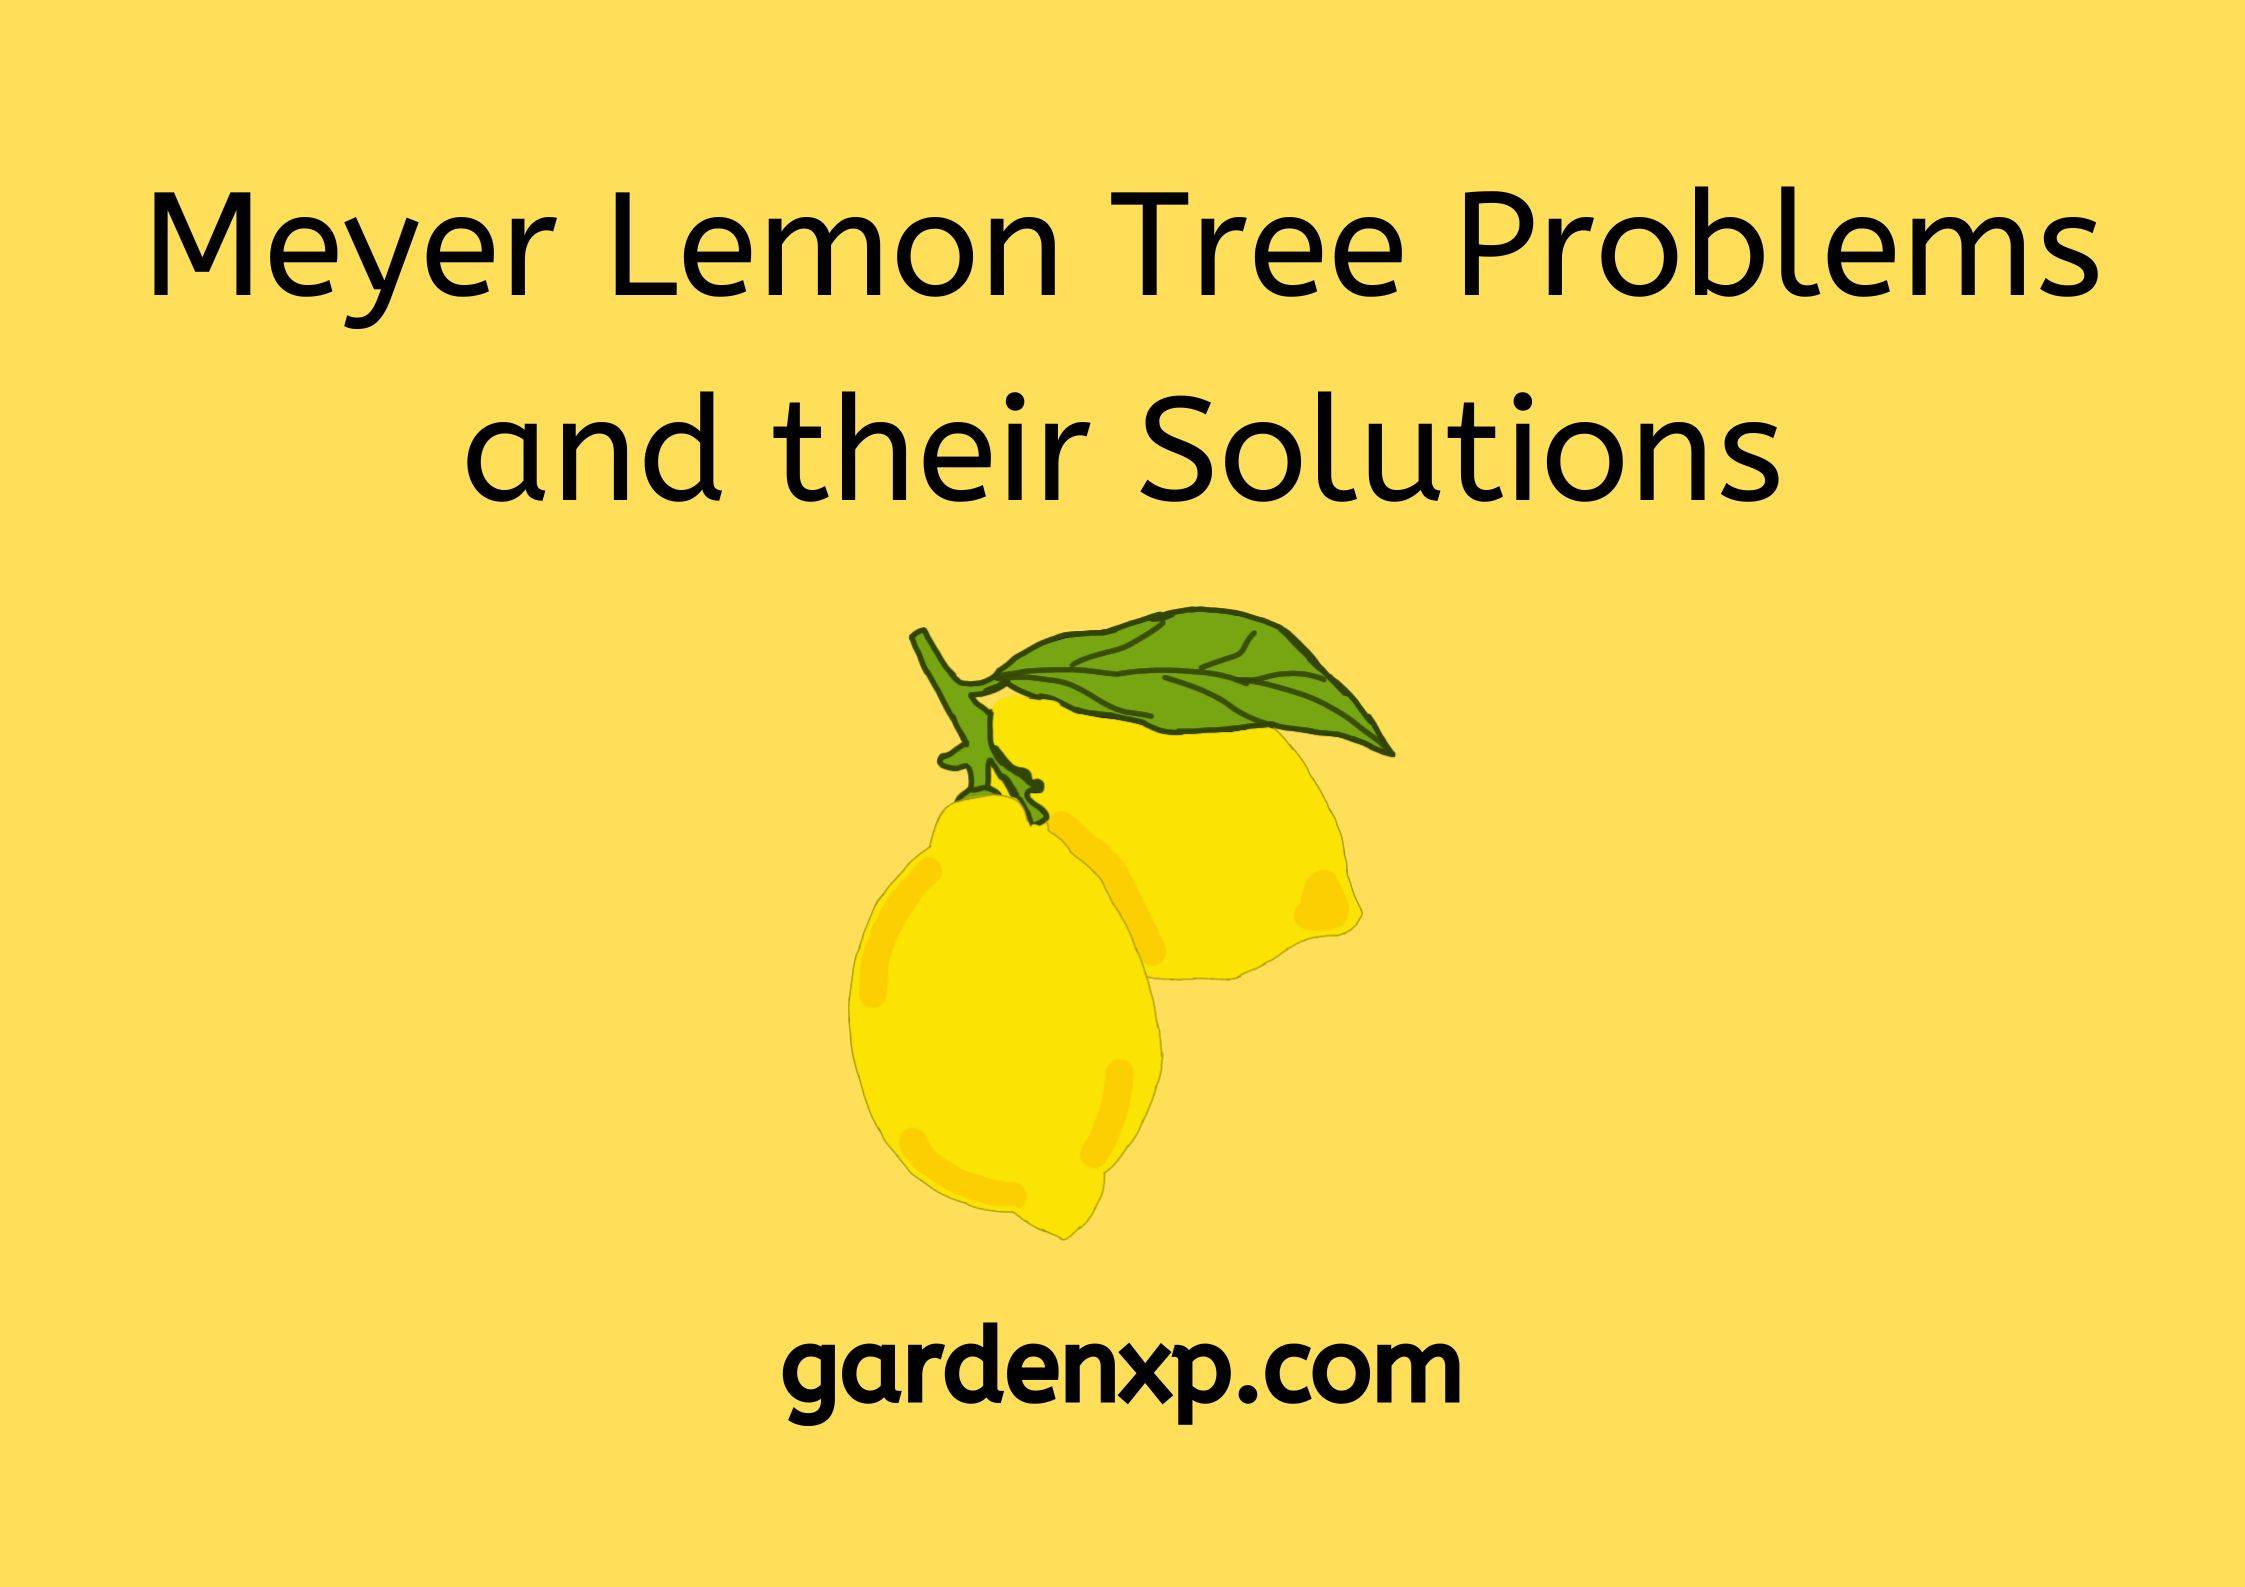 Meyer Lemon Tree Problems and their Solutions